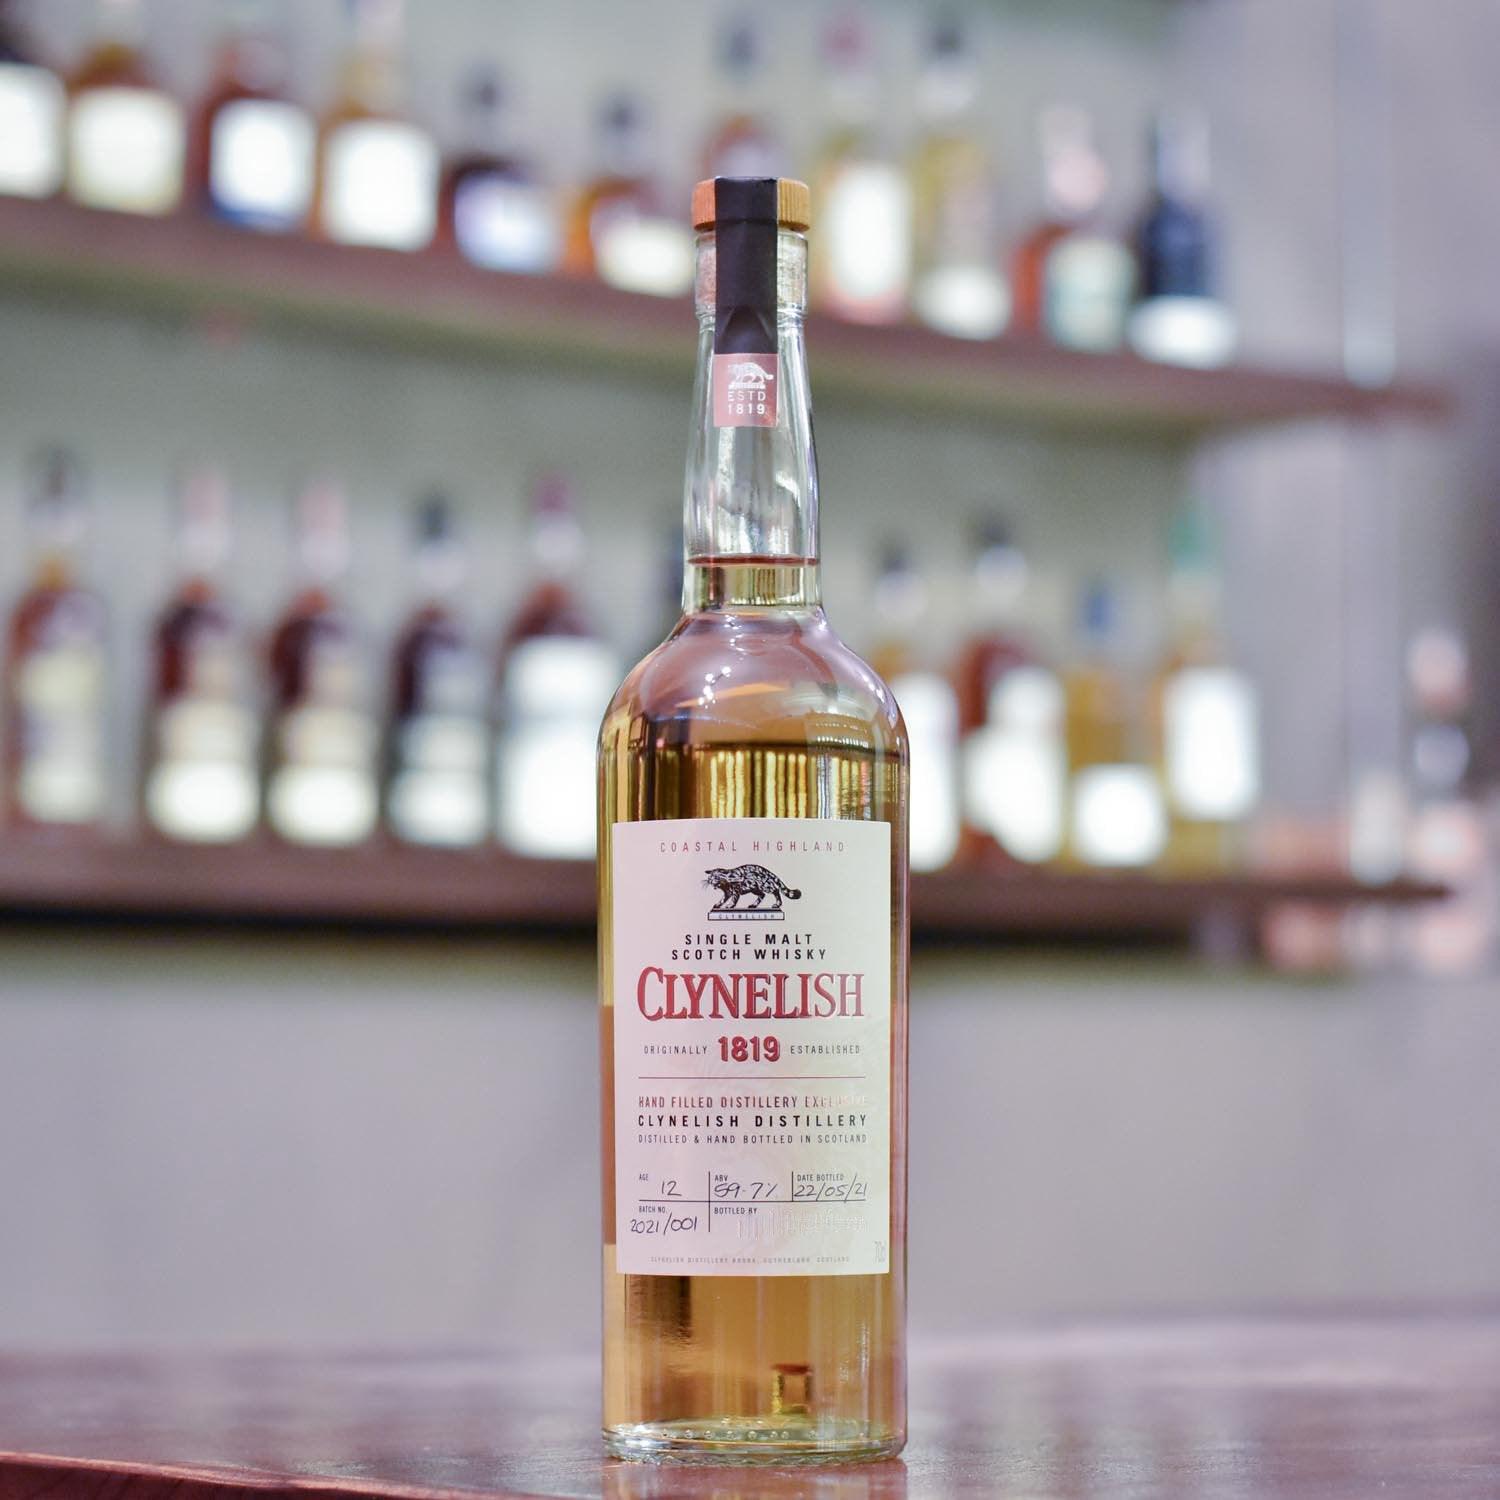 Clynelish 12 Year Old 2009 Hand-filled Cask 2021-001 - The Rare Malt